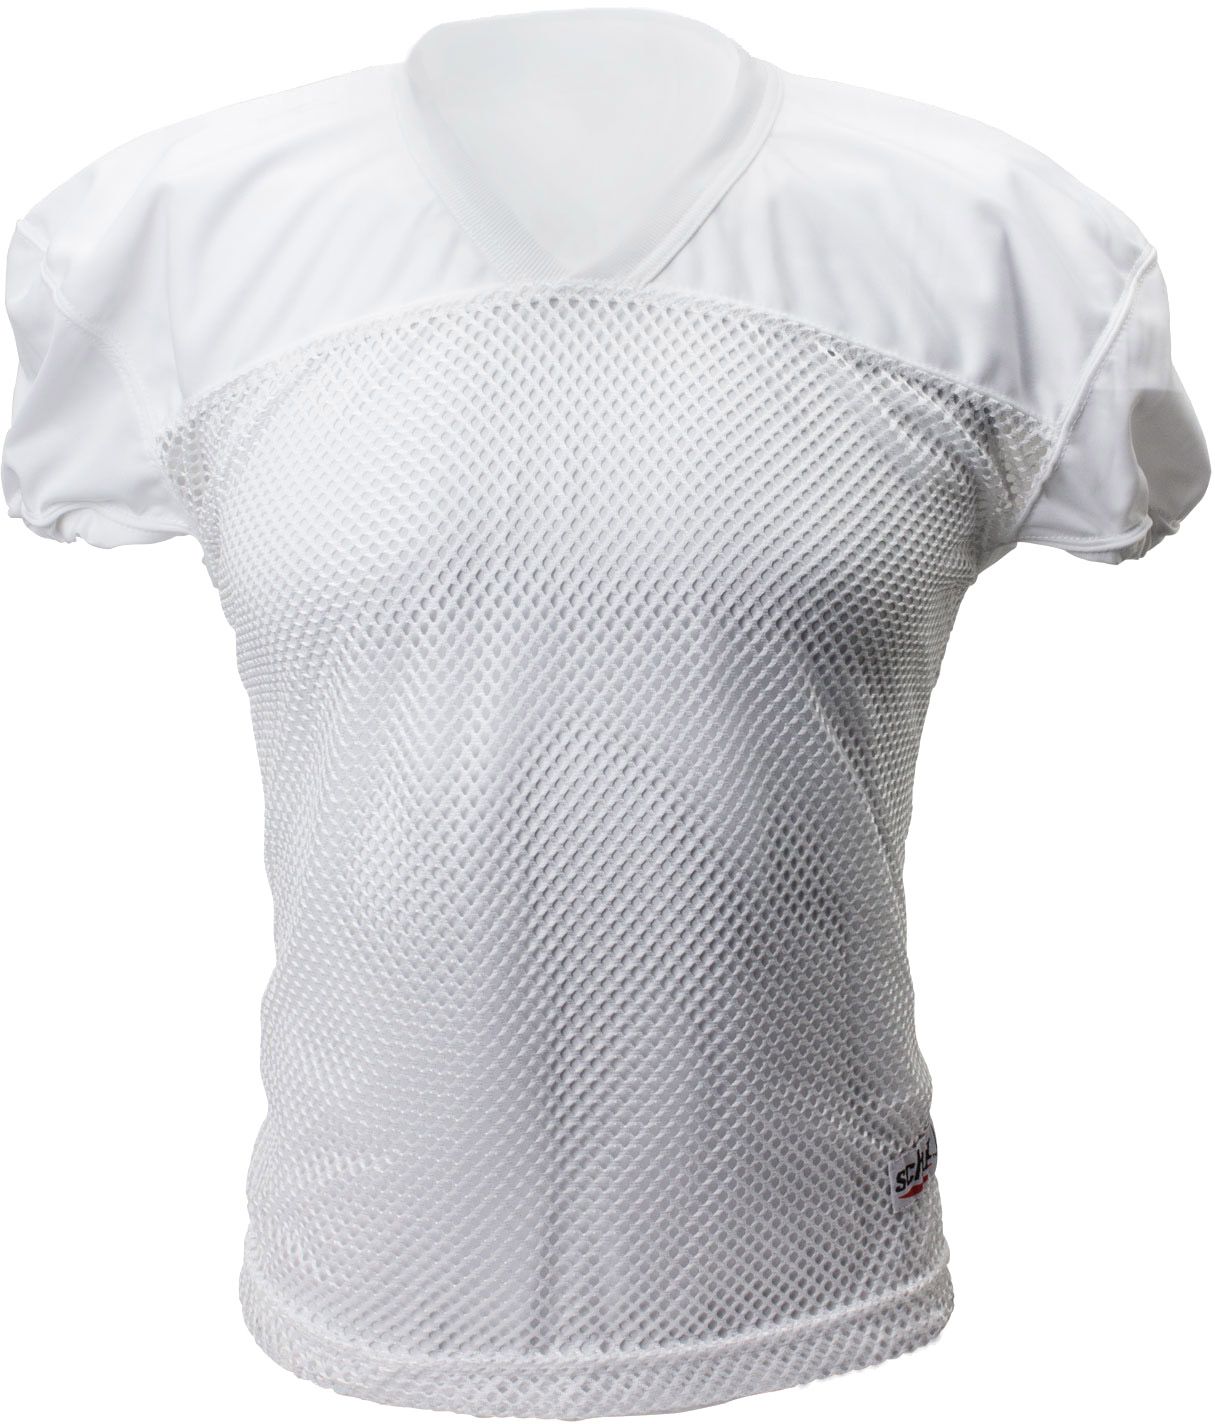 red football practice jersey